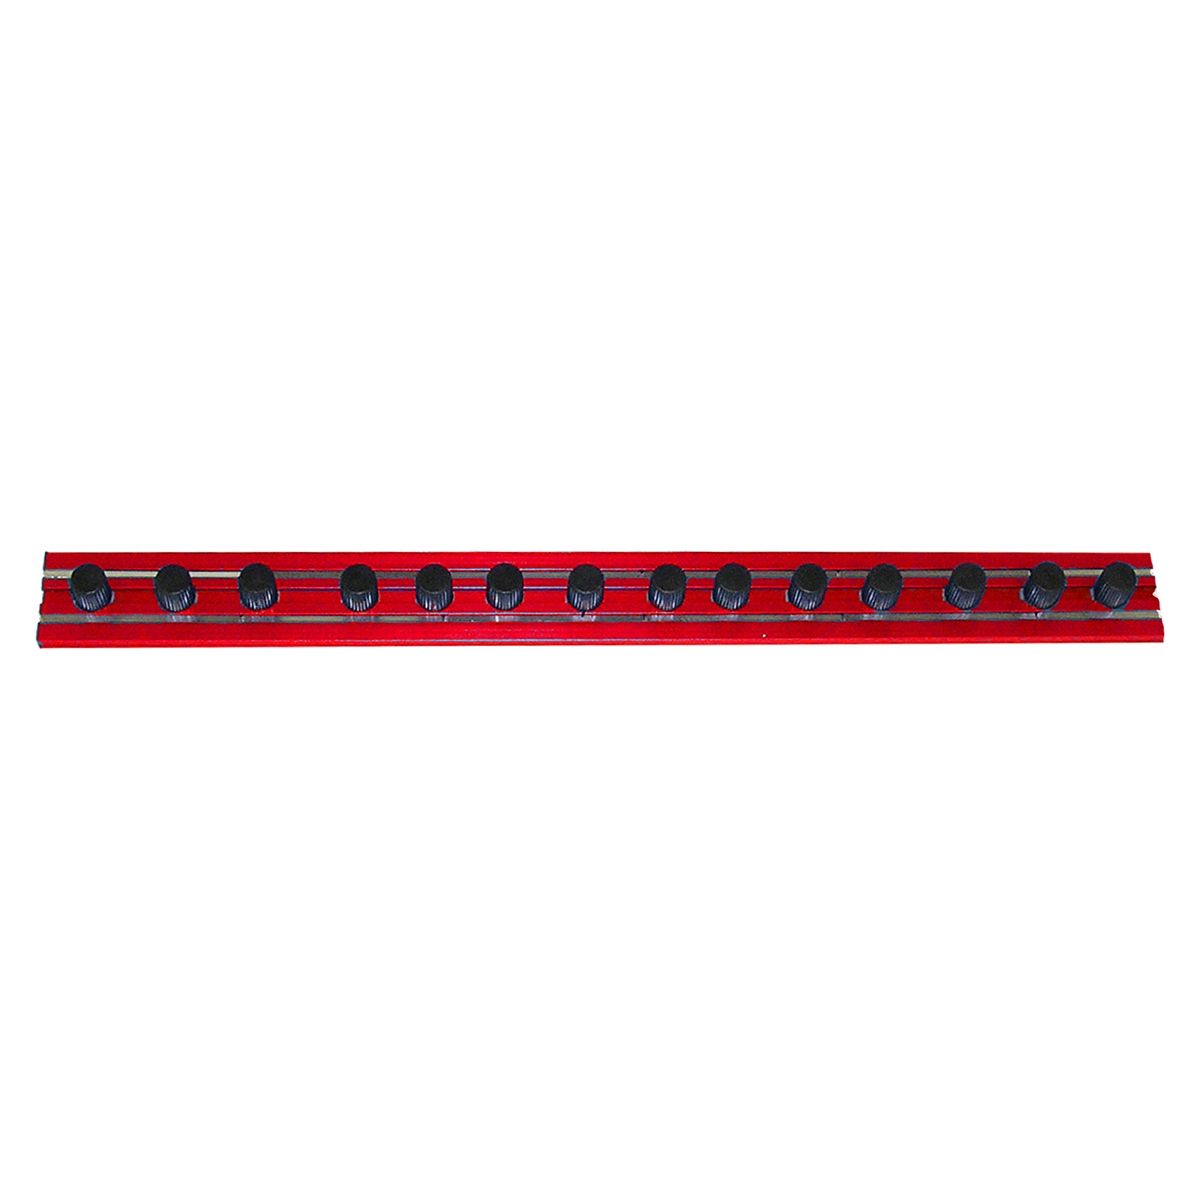 MAGRAIL TL 8 In Long 14-1/4" Studs Red